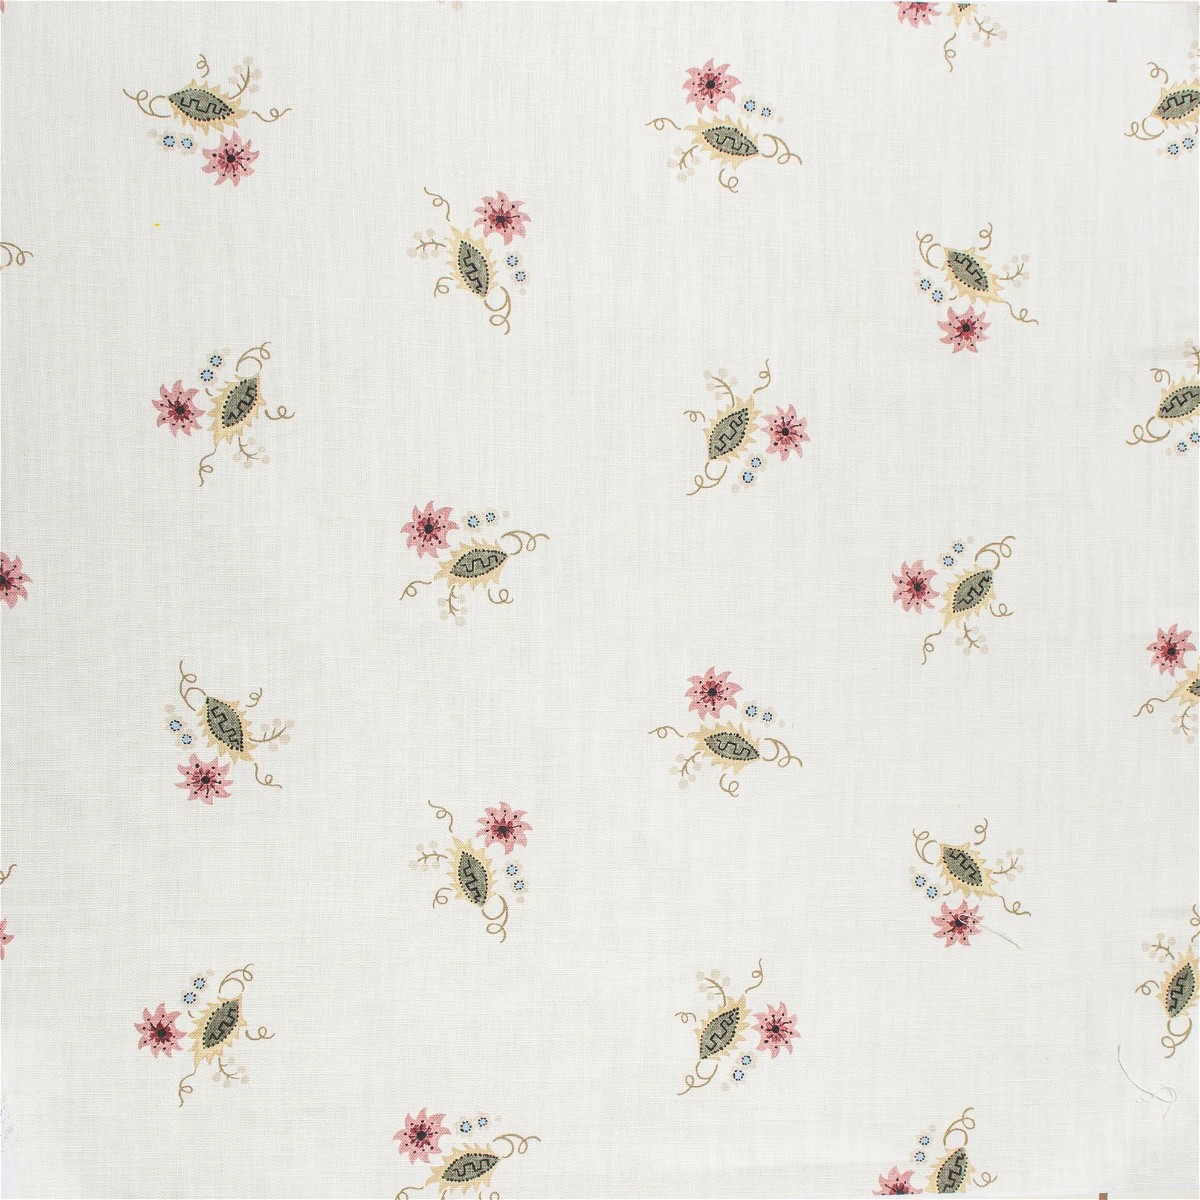 The image of an Floral Sprig Fabric product